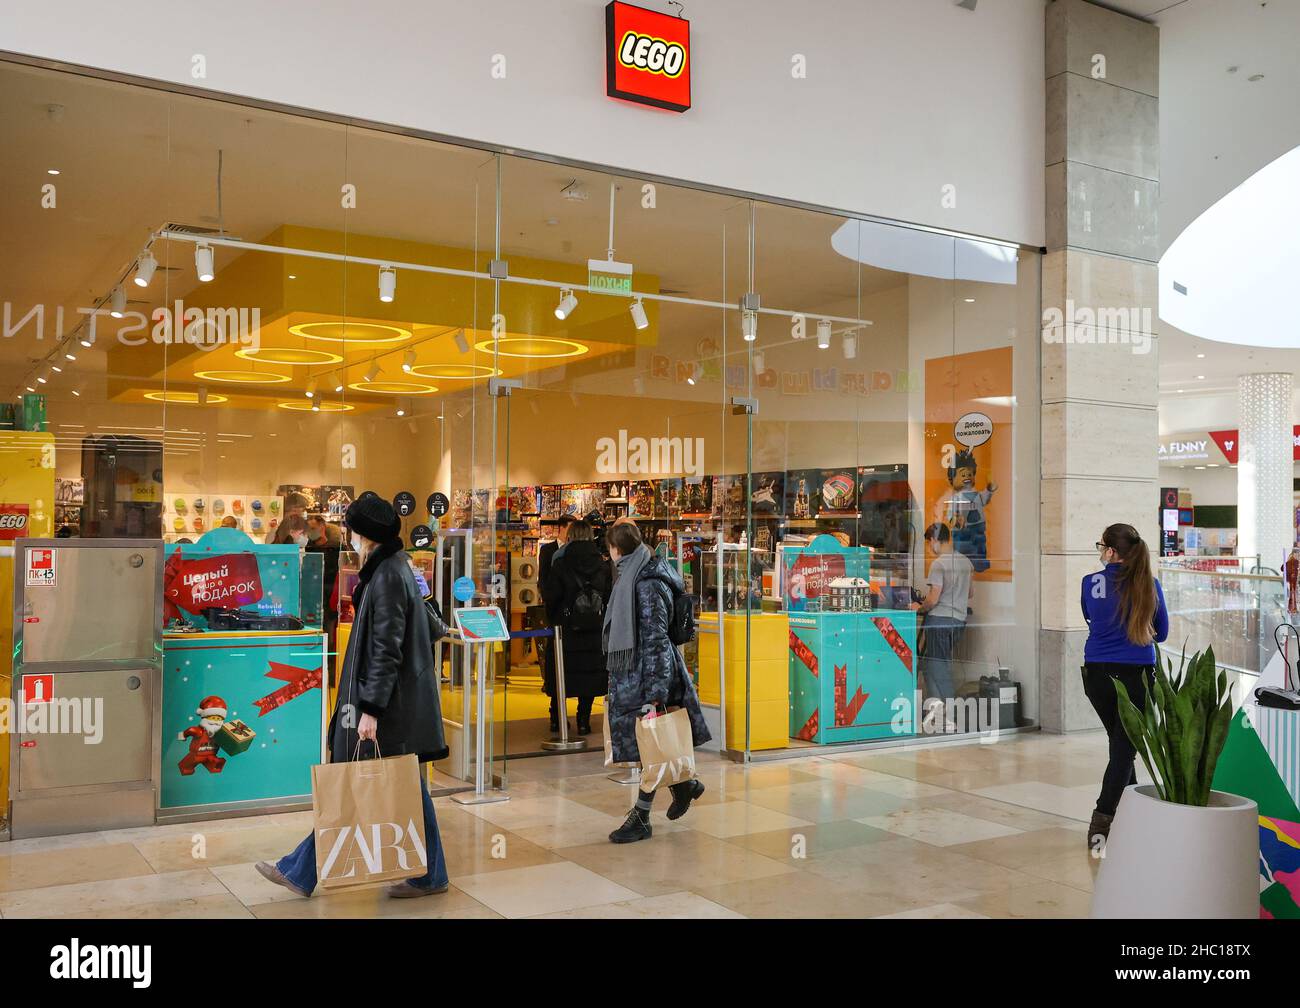 Page 2 - Lego Shop High Resolution Stock Photography and Images - Alamy